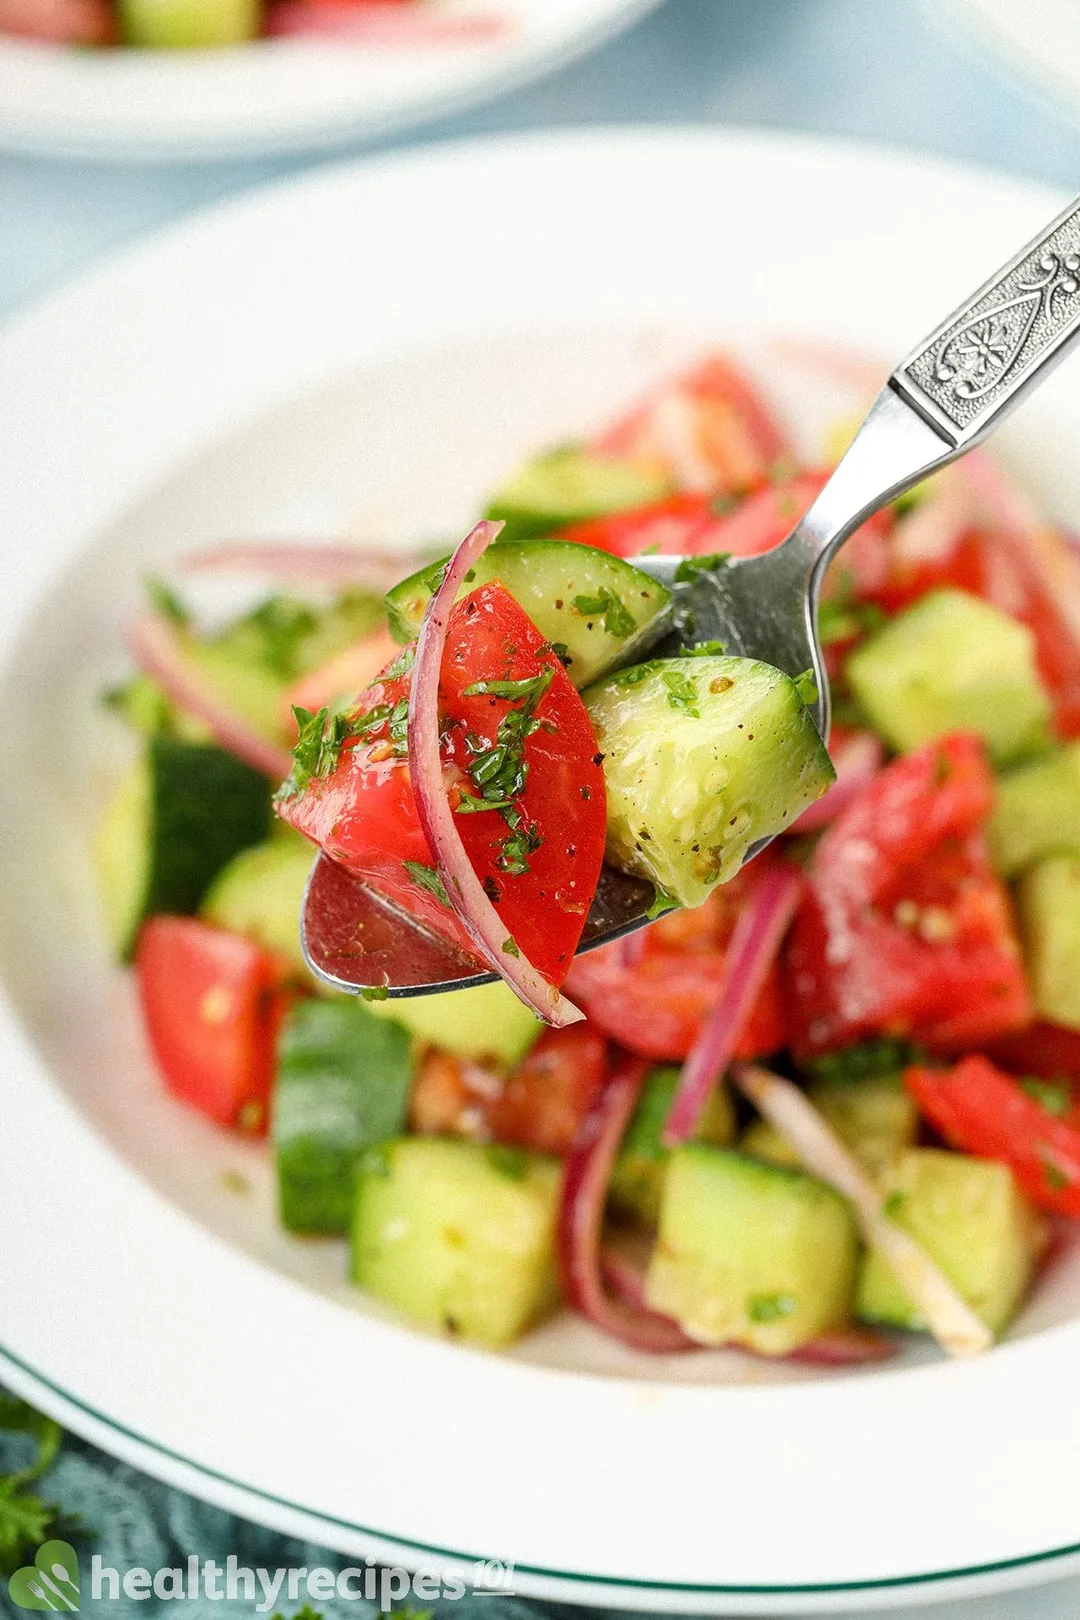 A spoon scooping up two cucumber quarter slices, a tomato wedge, and a thin red onion slice